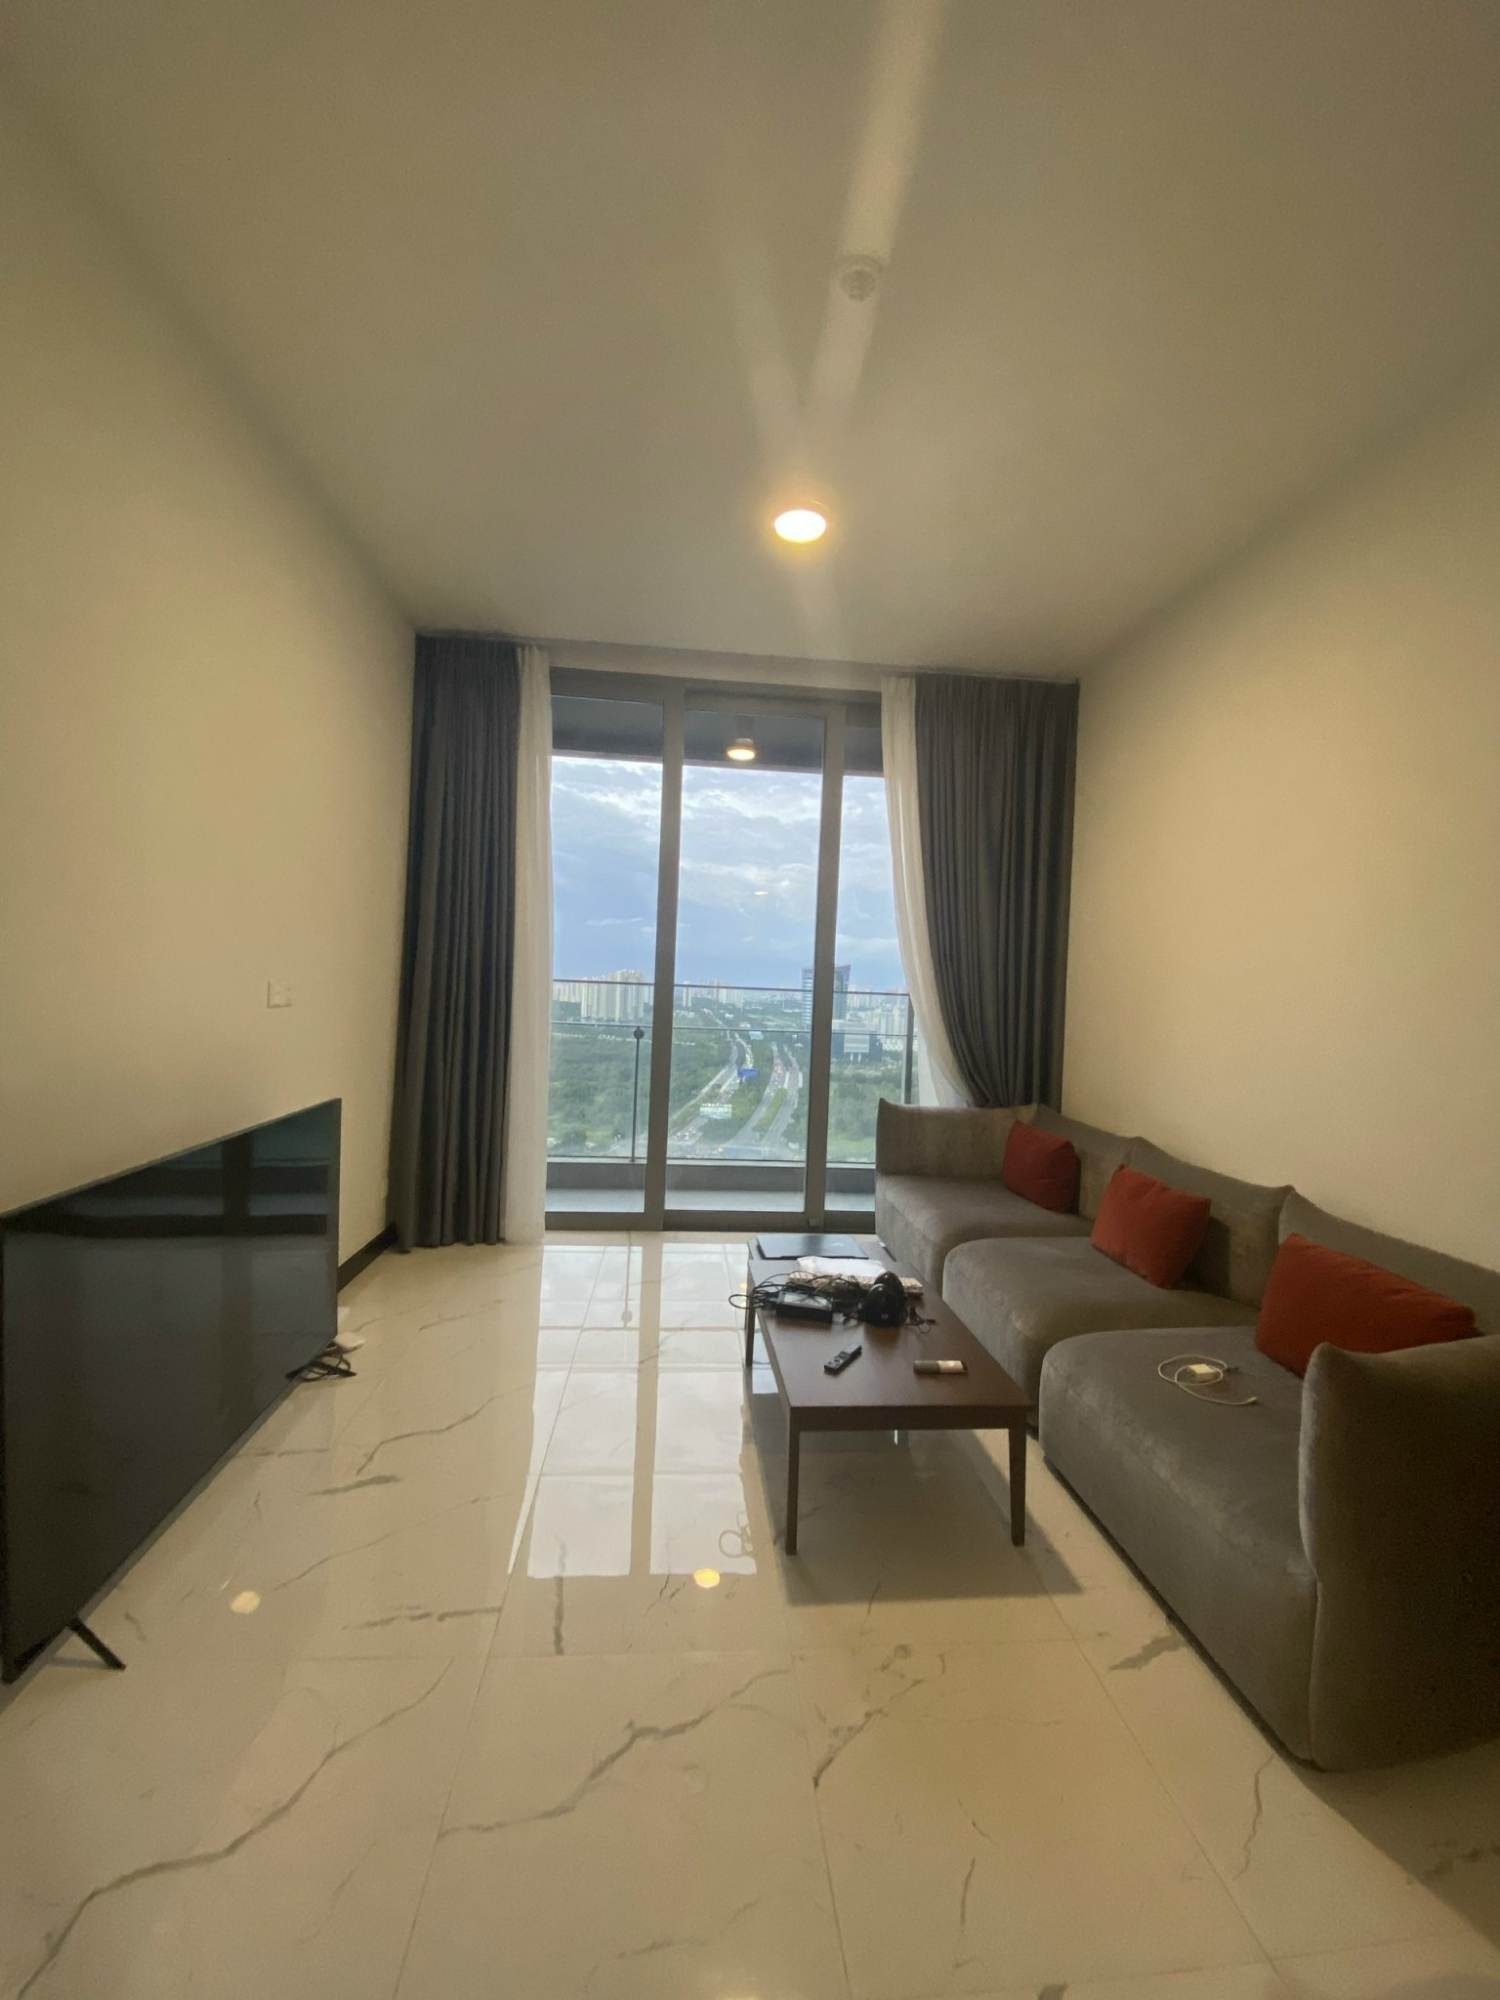 Empire City apartment for rent 2 bedrooms luxury furniture nice view